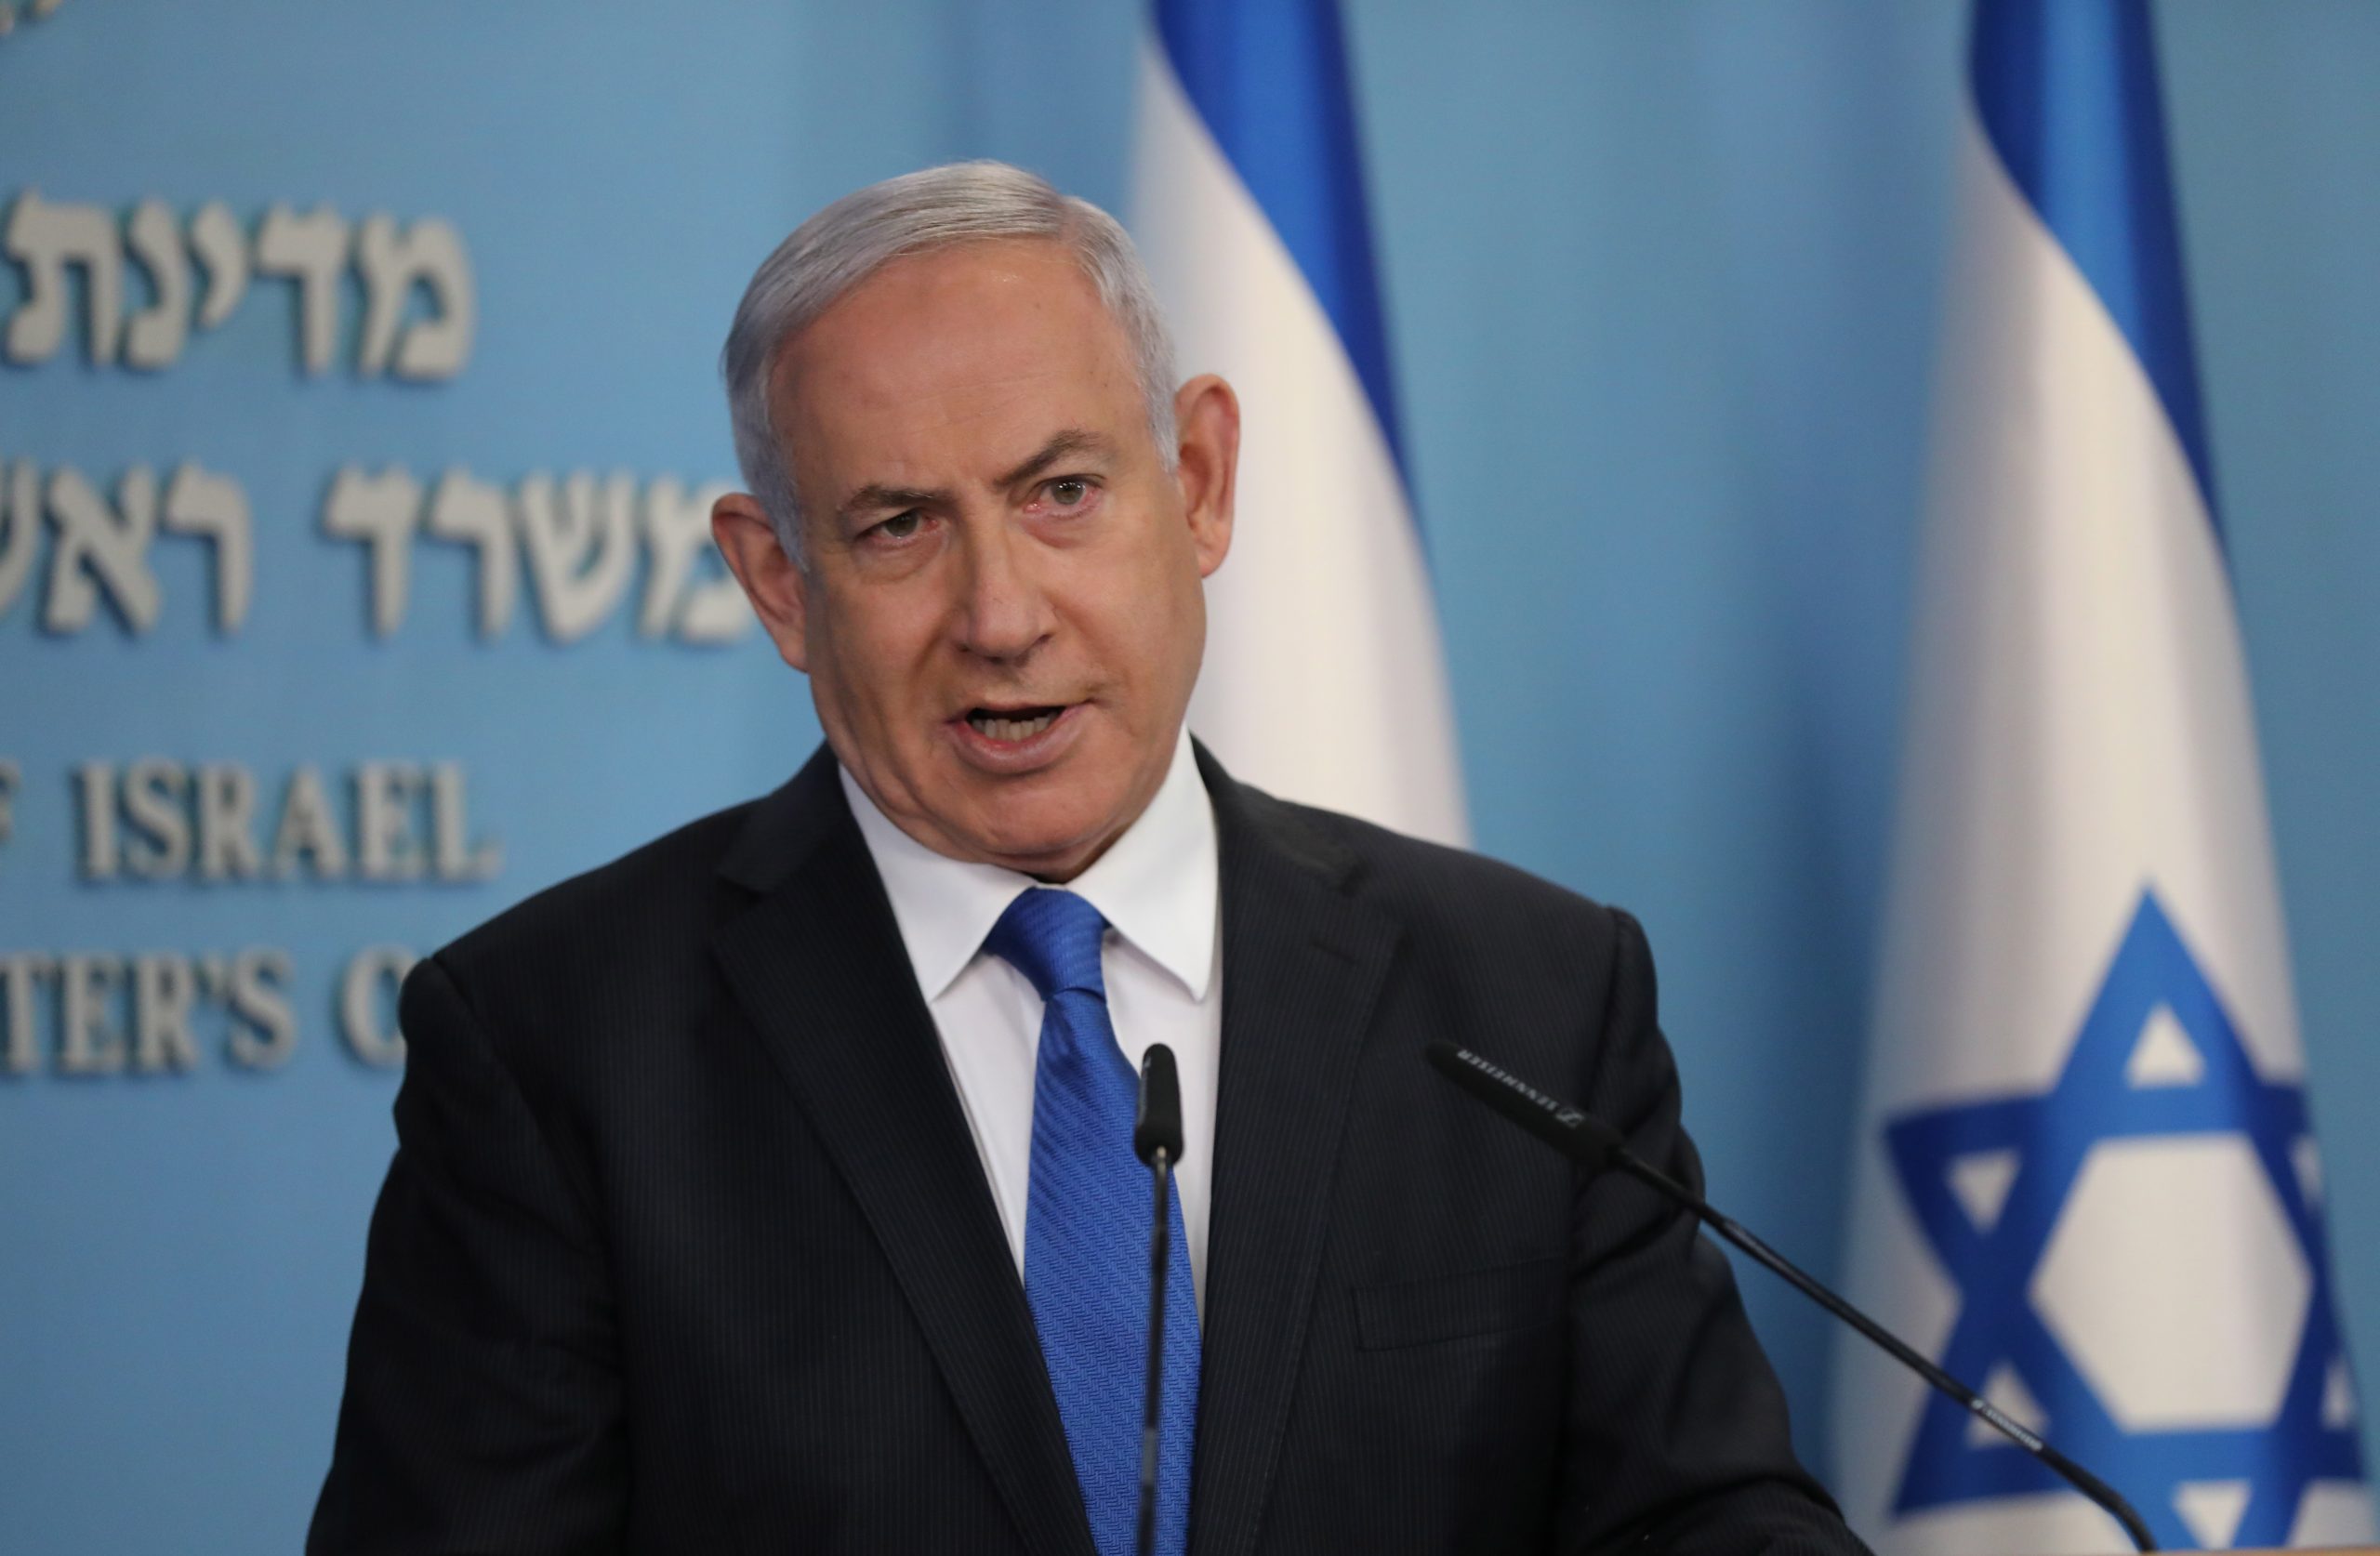 epa08883728 (FILE) - Israeli Prime Minister Benjamin Netanyahu announces a peace agreement to Establish Diplomatic ties between Israel and the United Arab Emirates, at the Prime Minister office in Jerusalem, Israel, 13 August 2020 (reissued 14 December 2020). Israeli media reports on 14 December 2020 state Benjamin Netanyahu, following an epidemiological inquiry, will go into quarantine until Friday, 18 December 2020 after meeting with a verified coronavirus patient. The prime minister underwent corona tests 13 December and 14 December that were found to be negative,  EPA/ABIR SULTAN / POOL *** Local Caption *** 56272312